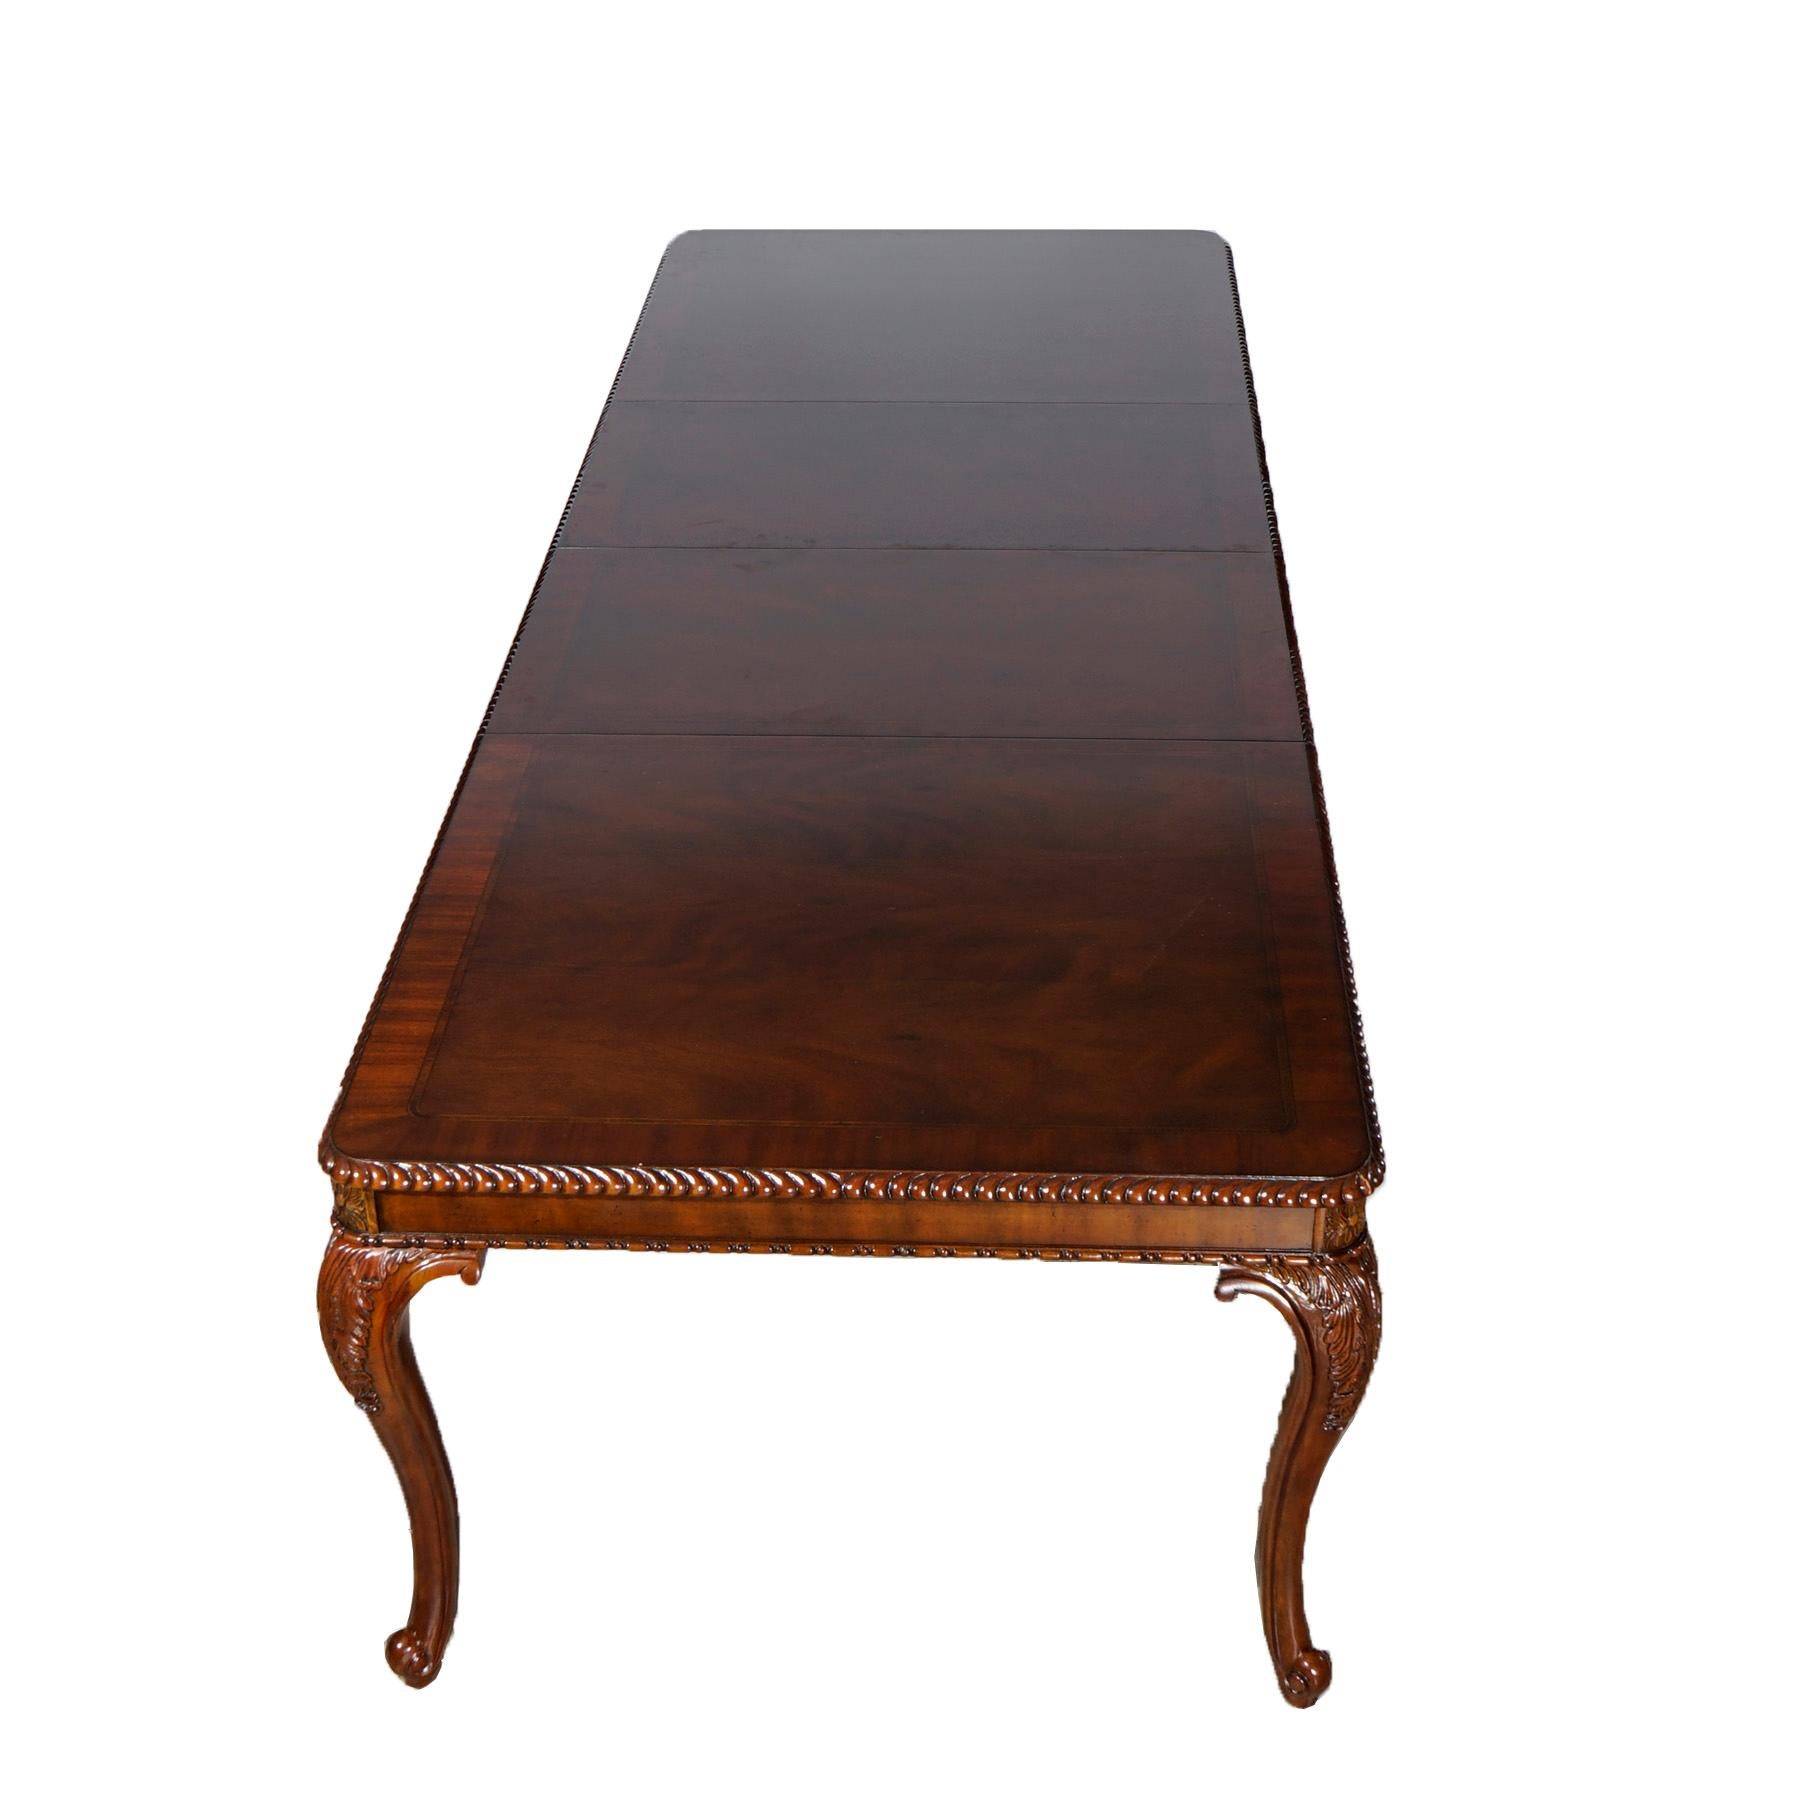 An extension dining table by Drexel of the Heritage Collection offers mahogany construction with inlaid satinwood banded top with carved rope twist trim raised on cabriole legs with carved acanthus knees, includes two leaves, 20th